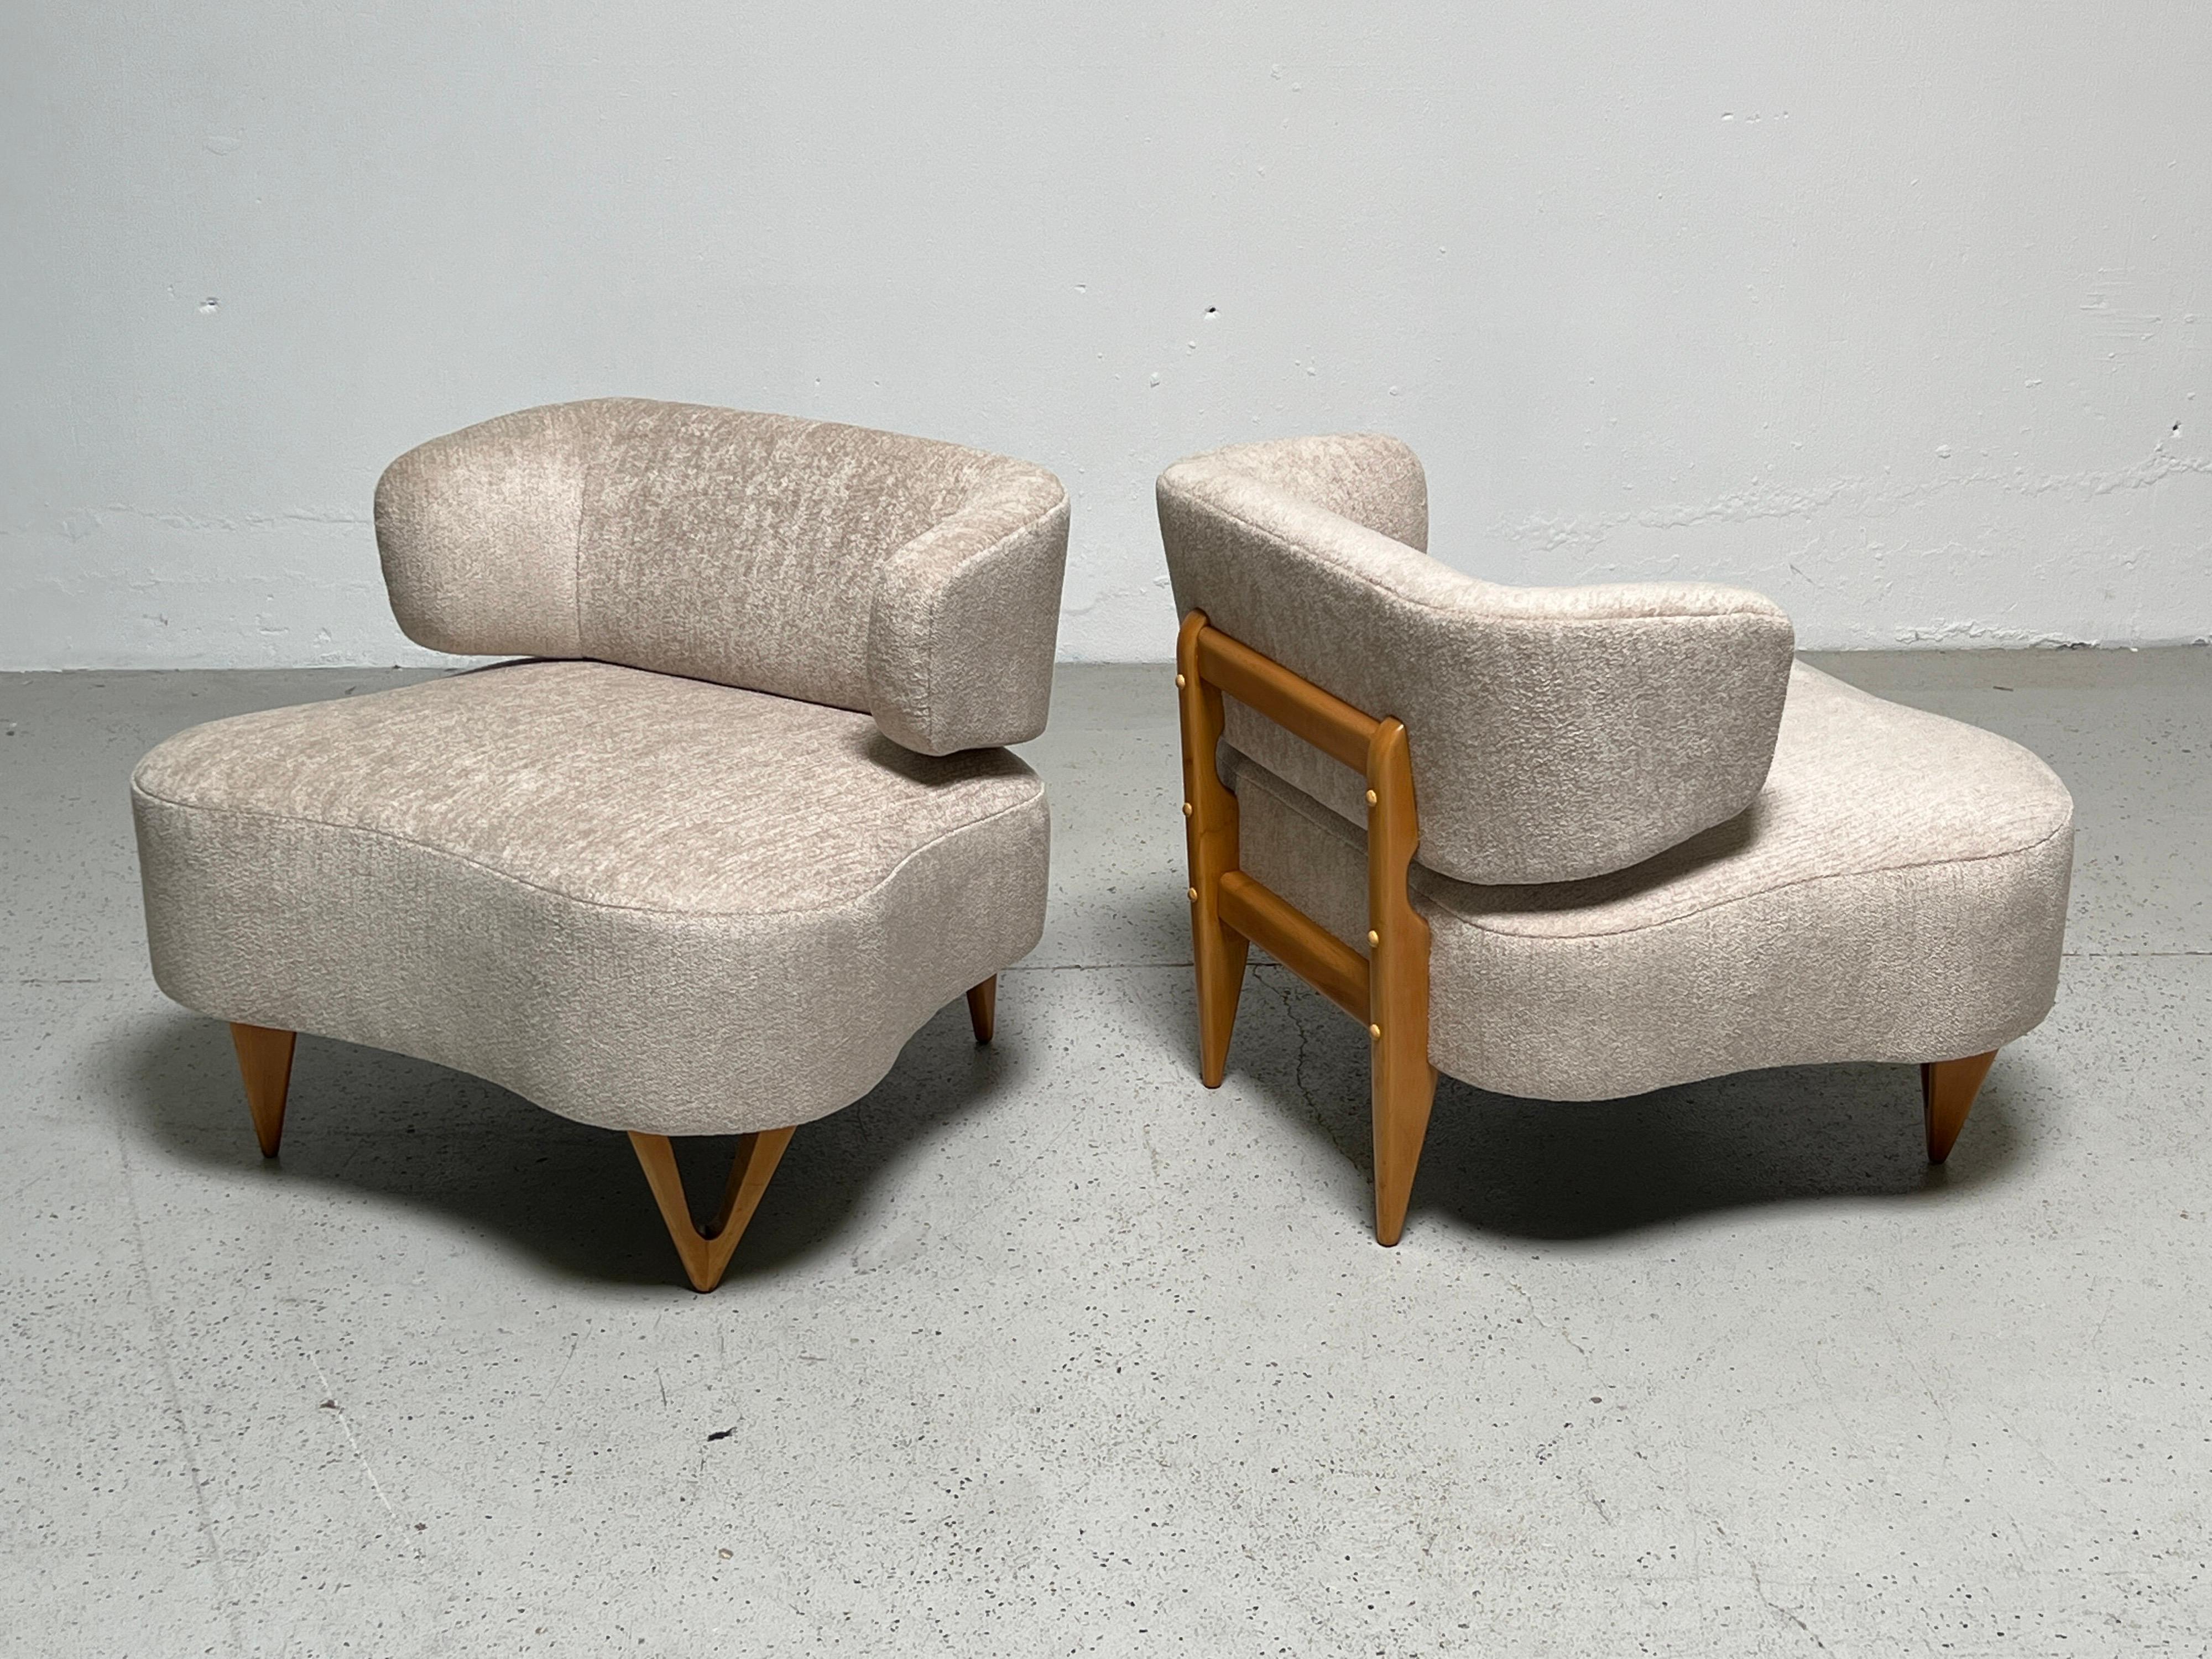 A pair of high style armless lounge chairs with sculpted legs. Fully restored and reupholstered in Holly Hunt fabric.